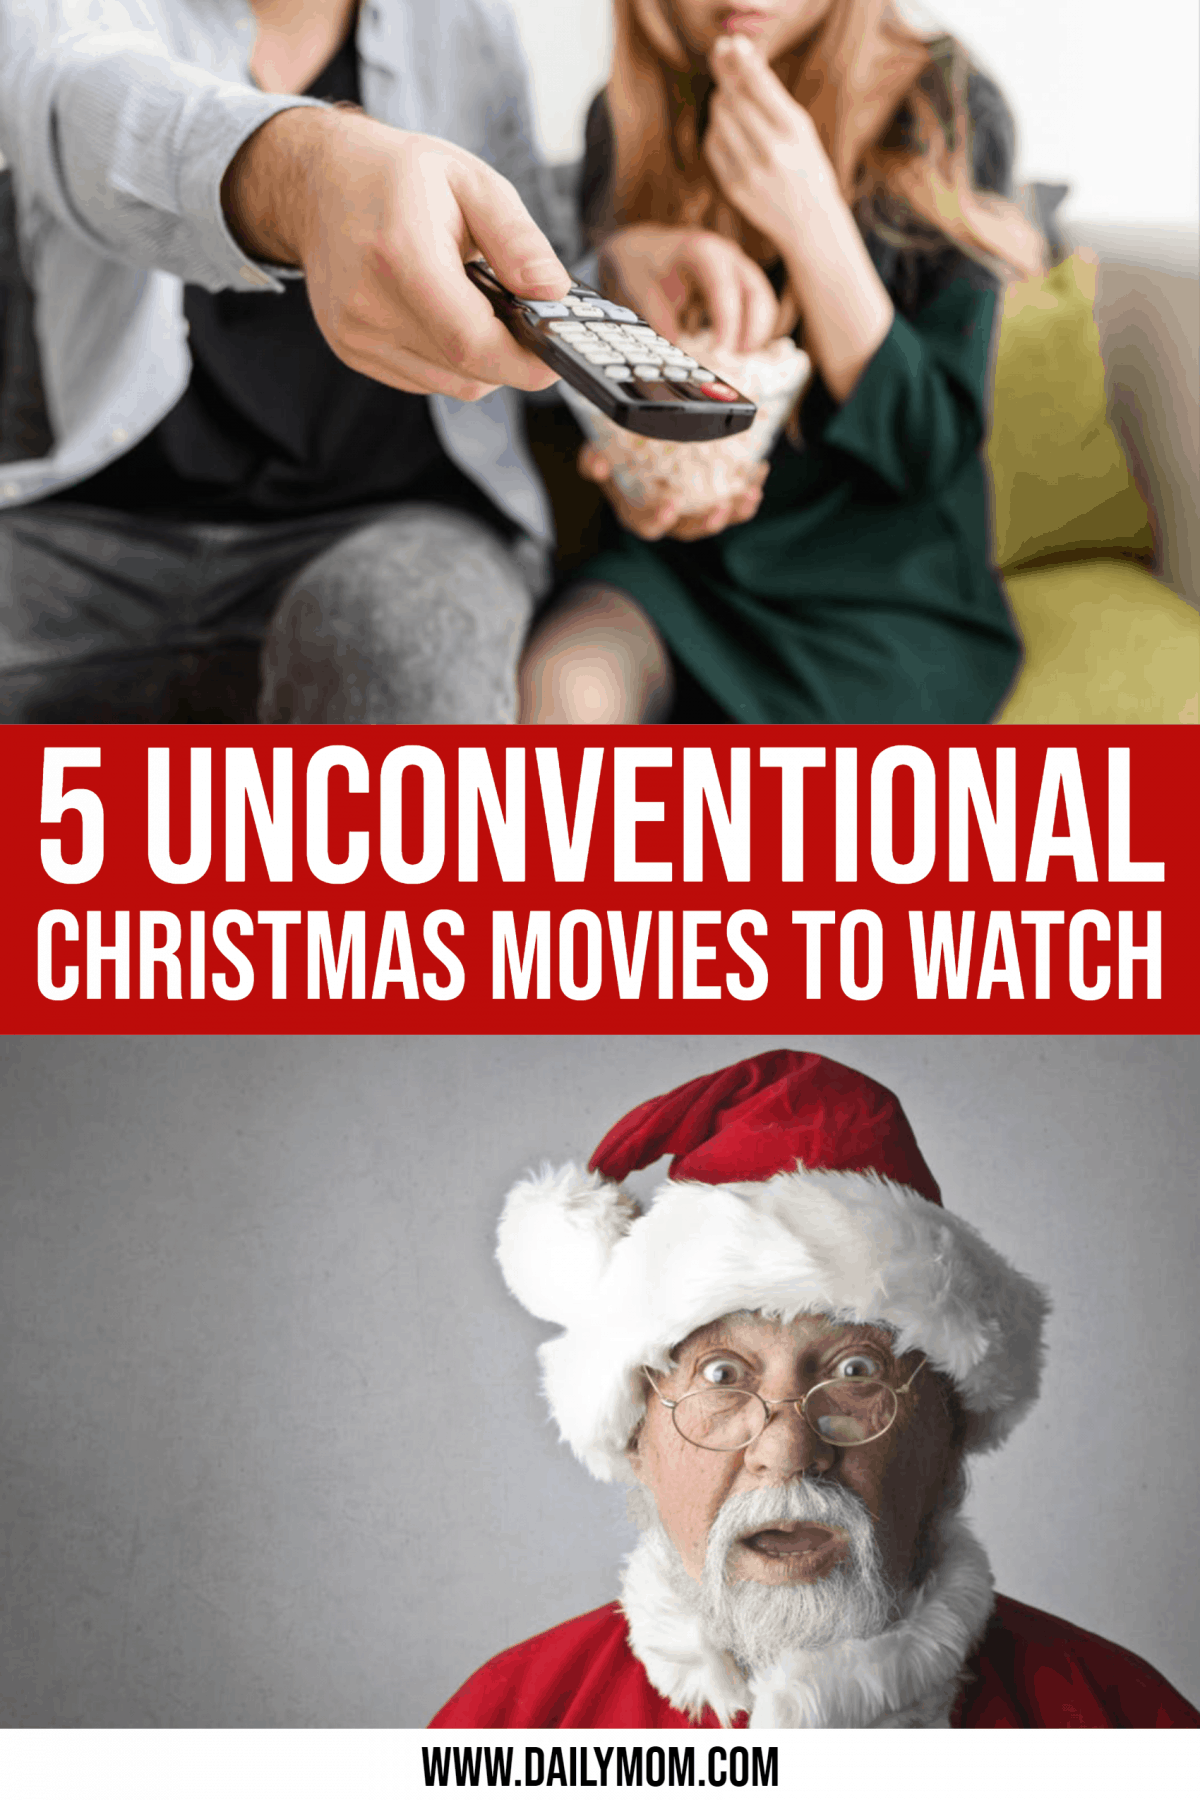 5 Of The (Unconventional) Top Christmas Movies You Need To Watch This Holiday Season